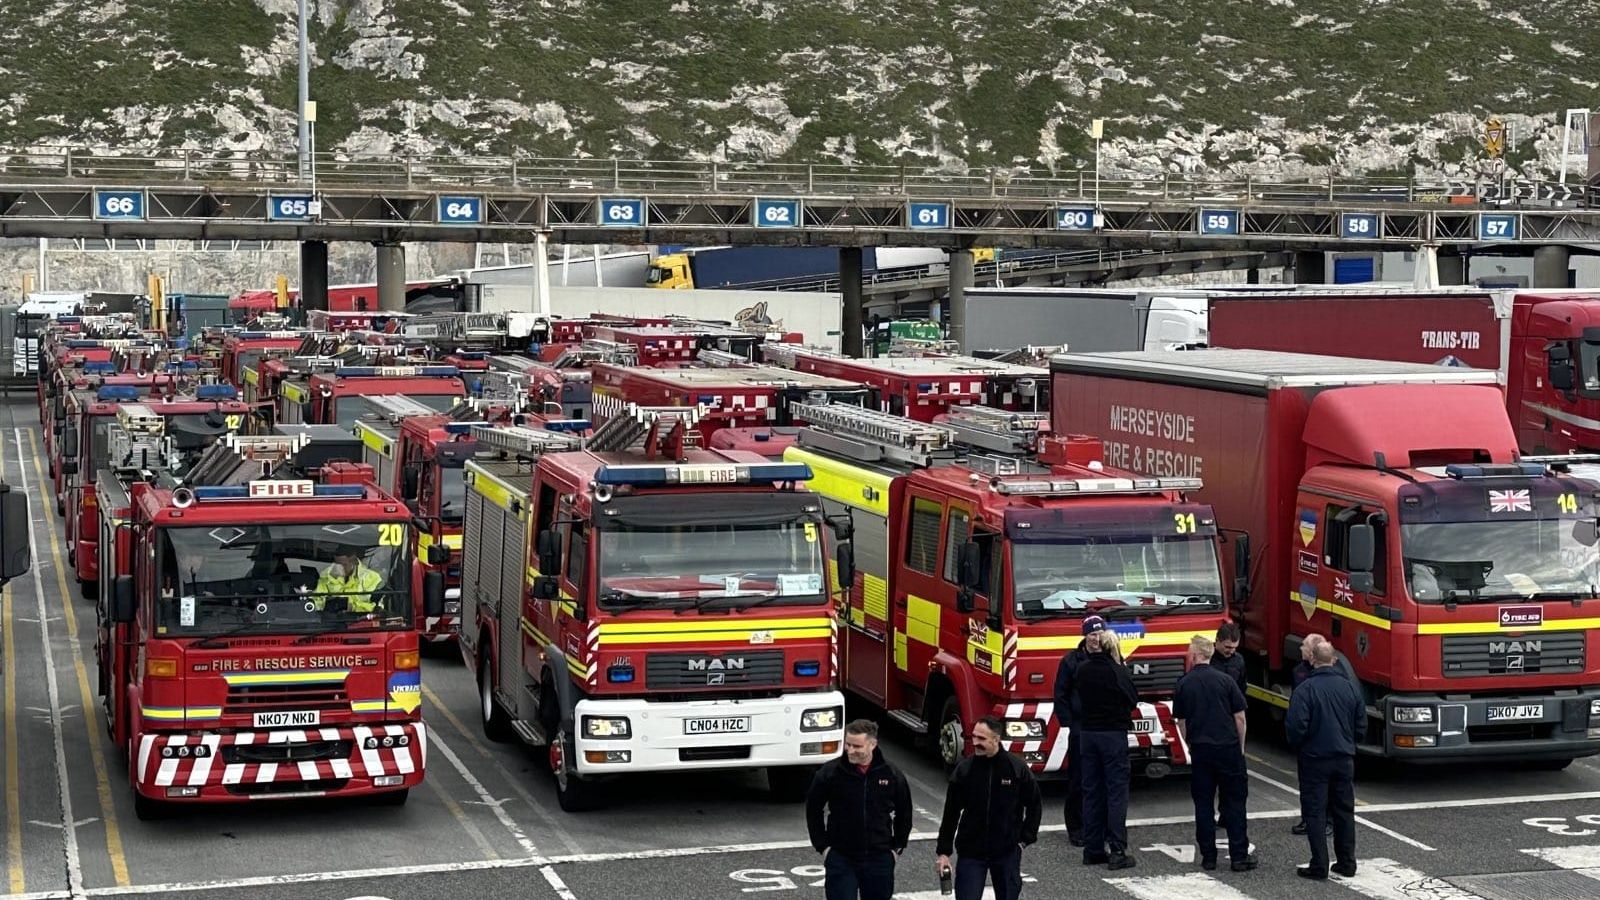 Merseyside leading the largest UK fire and rescue service convoy to ...